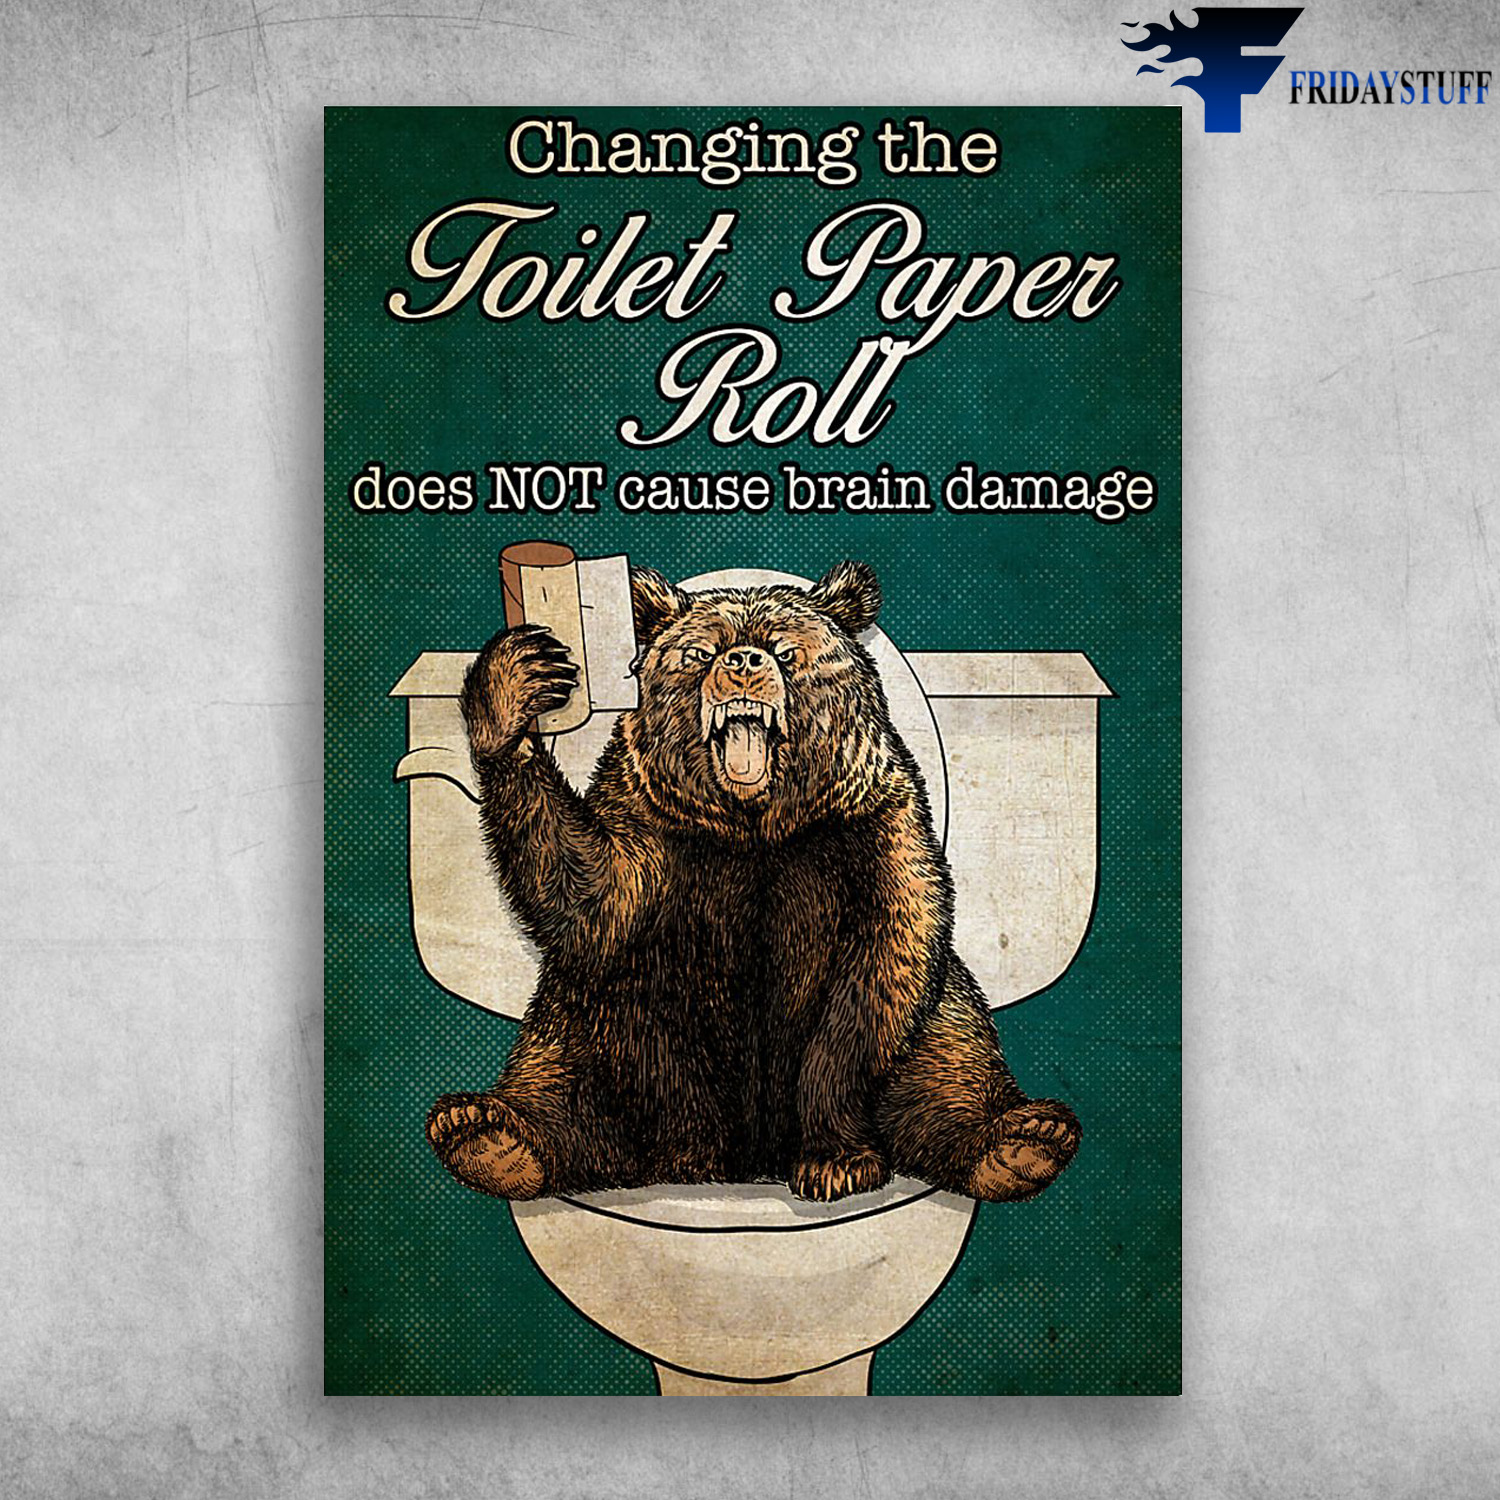 The Bear With Toilet Paper Roll - Changing The Toilet Paper Roll, Does not Cause Brain Damage